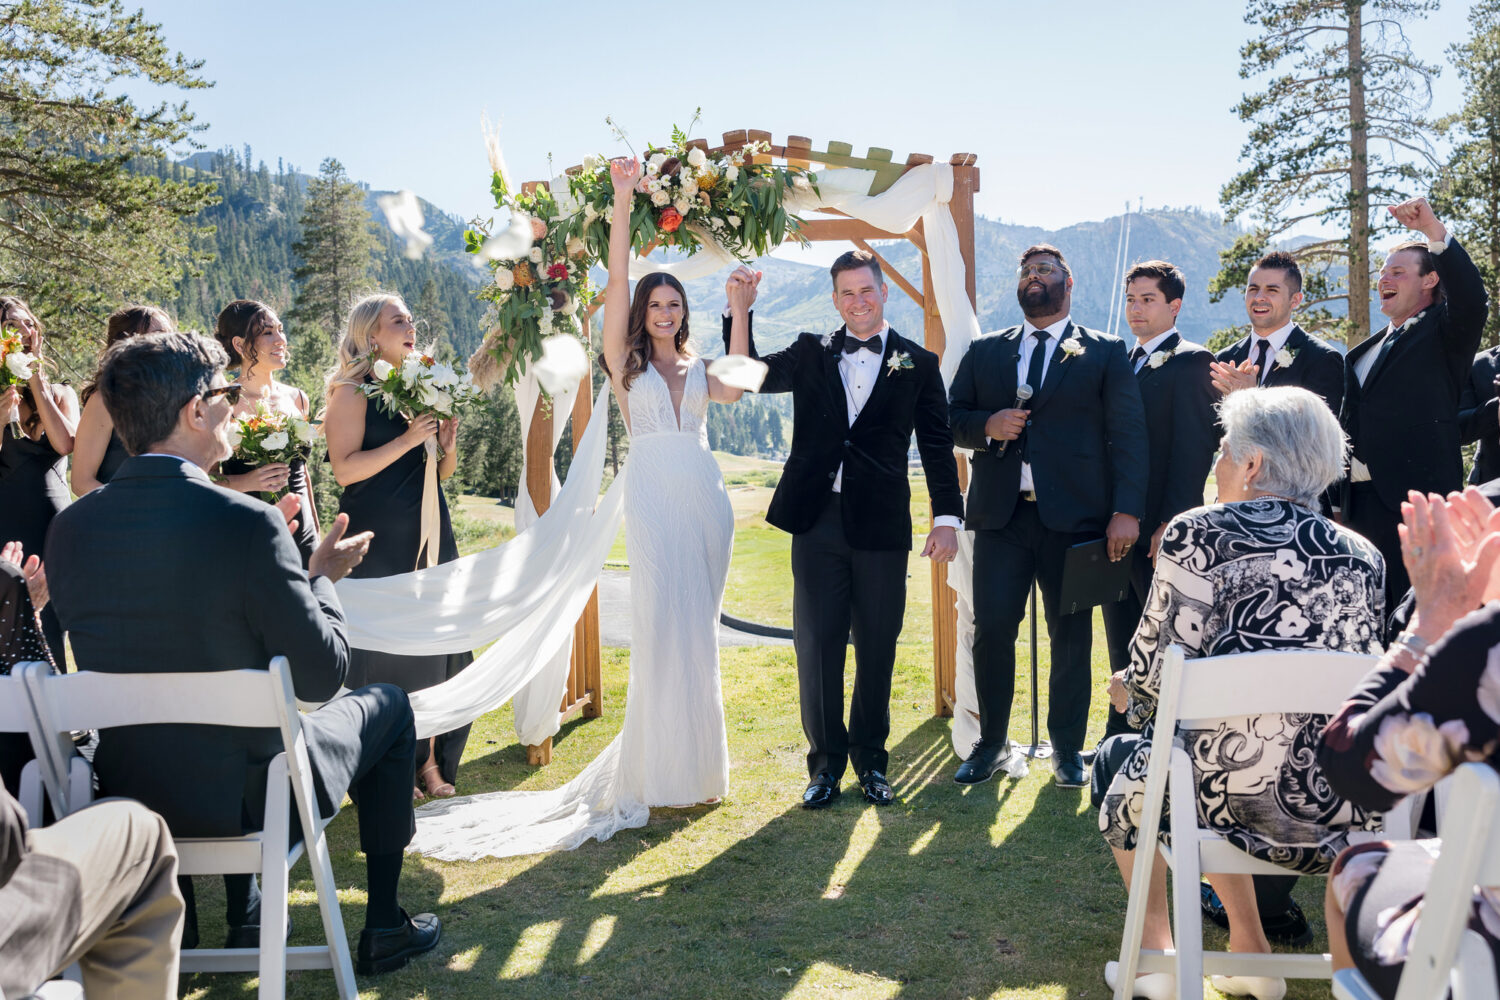 A moment of celebration at an Everline Resort wedding, captured by candid photographer Chris Werner. 